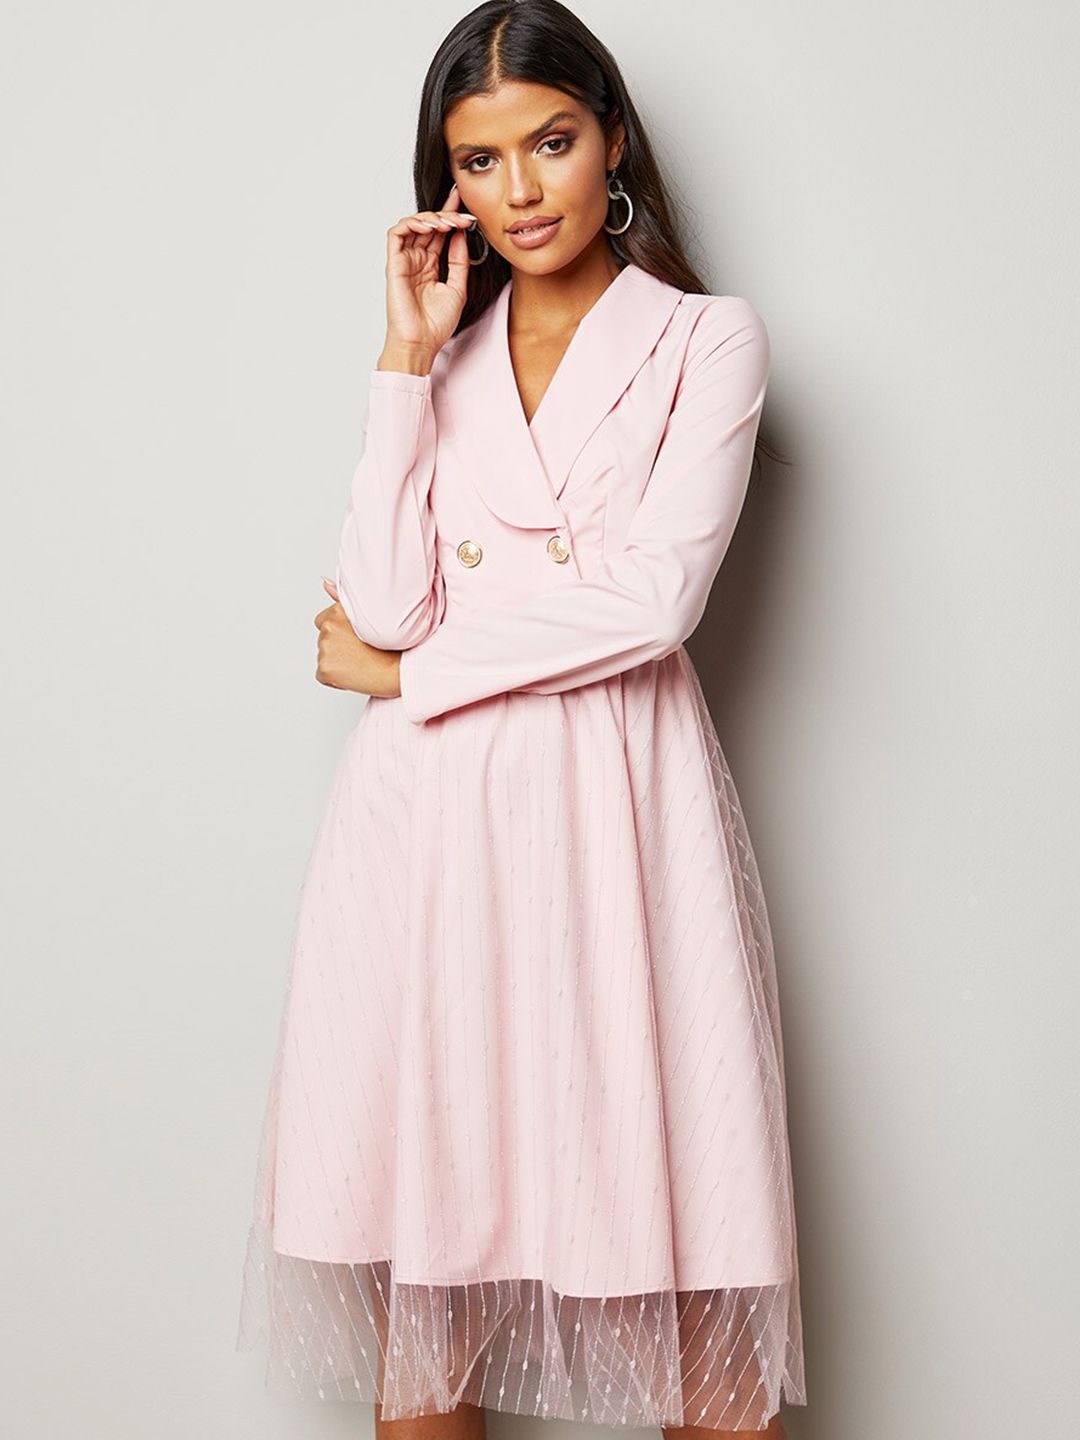 Styli Pink Formal A-Line Midi Dress Price in India